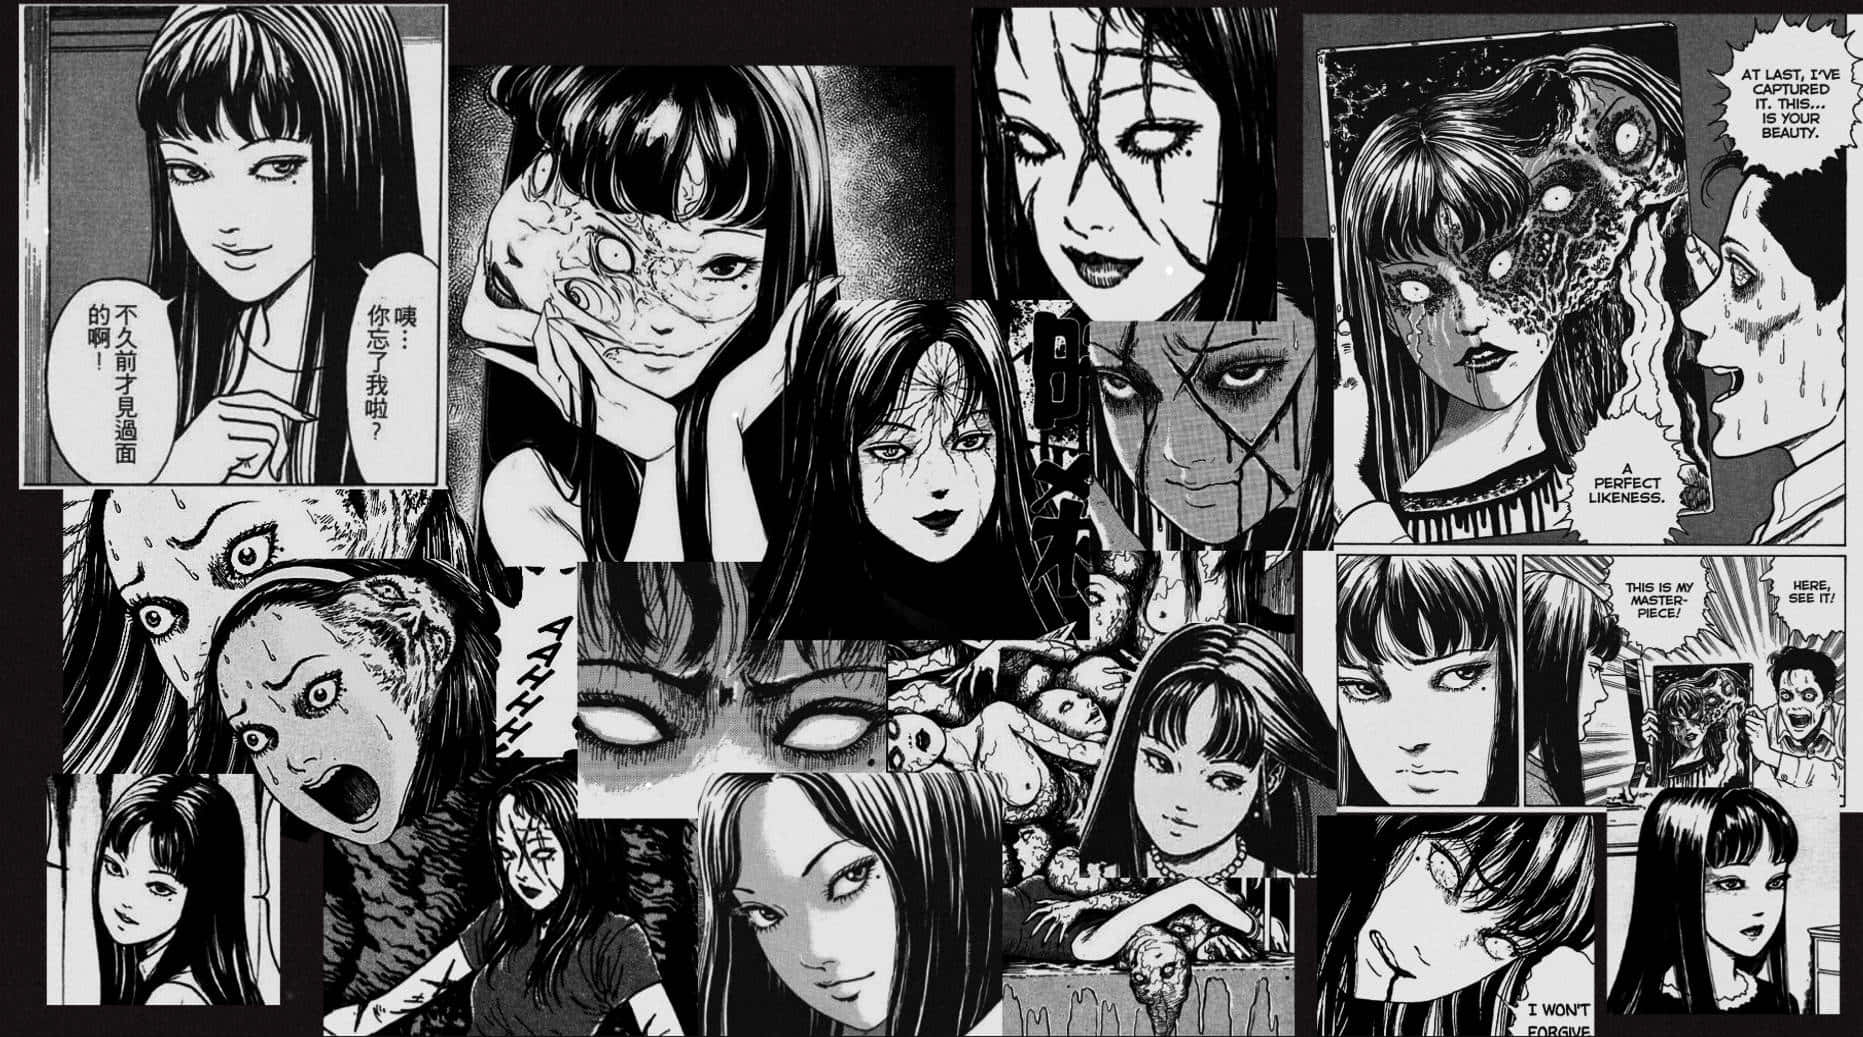 Mysterious and enigmatic, Tomie creeps into our hearts Wallpaper